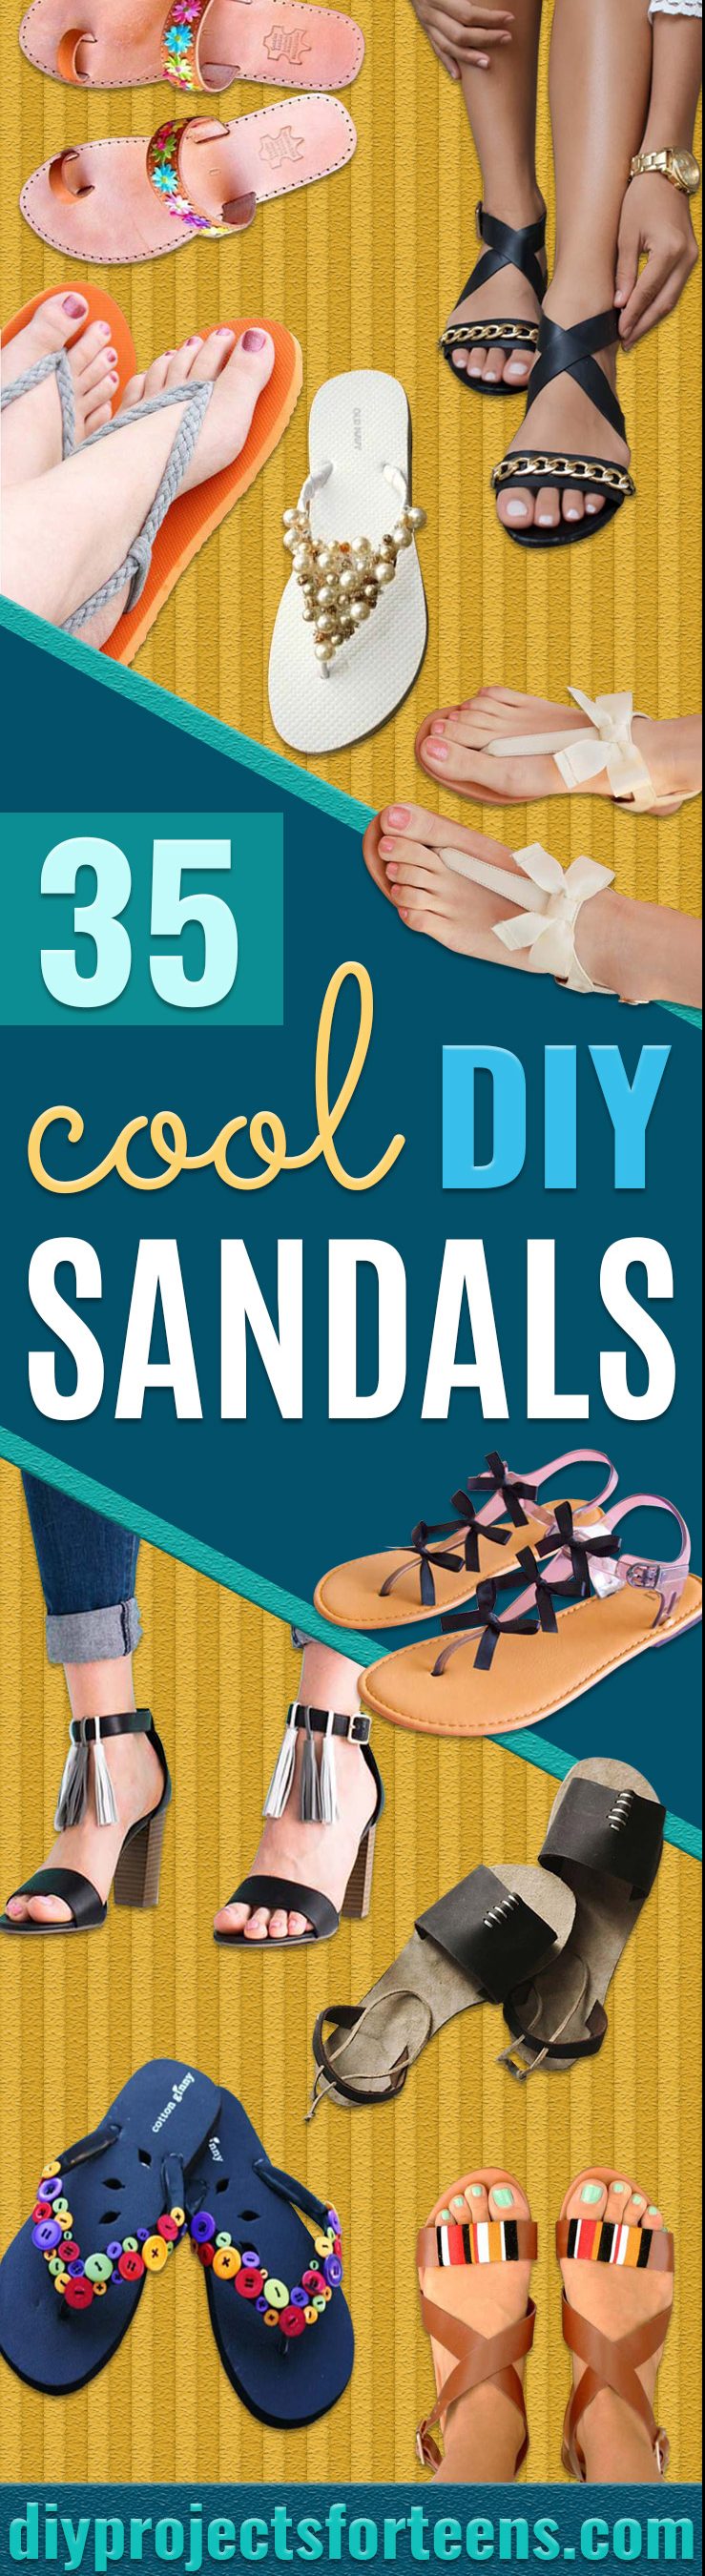 DIY Sandals and Flip Flops - Simple Yet Chic DIY Shoes - Creative, Cool and Easy Ways to Make or Update Your Shoes - Decorate Flip Flops with Cheap Dollar Store Crafts and Ideas - Beaded, Leather, Strappy and Painted Sandal Projects - Fun DIY Projects and Crafts for Teens and Teenagers 